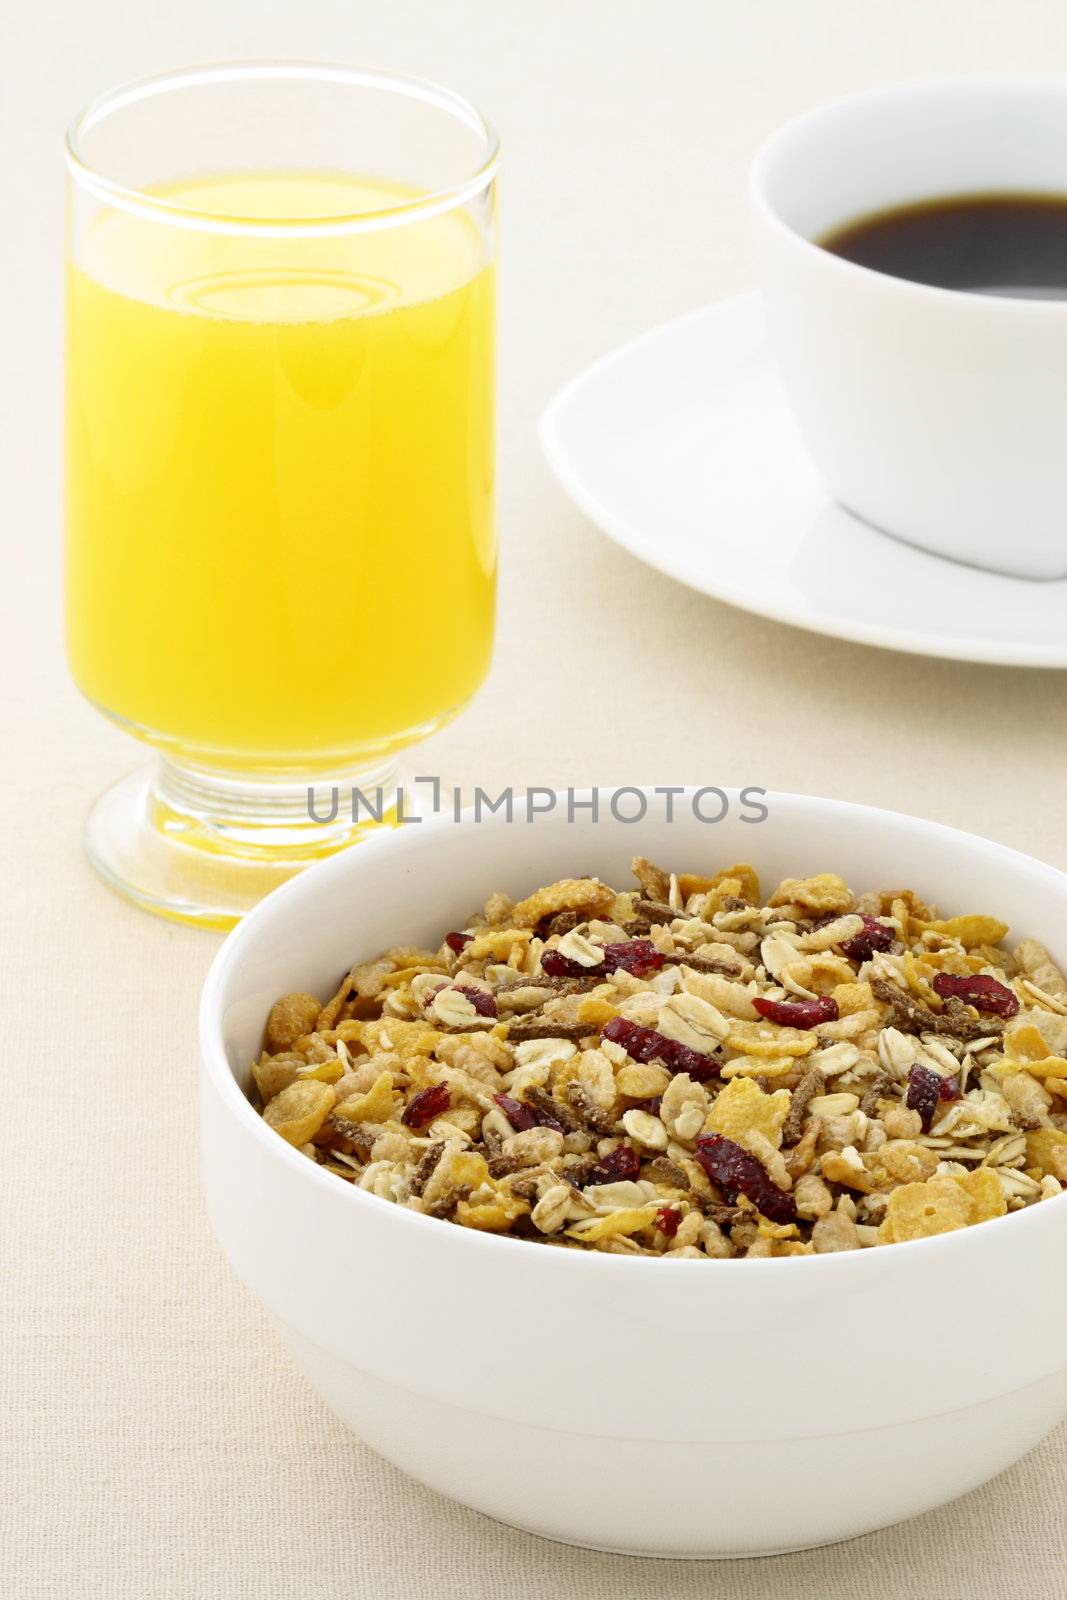 delicious breakfast with fresh orange juice, hot coffee and a healthy bowl of cereal.